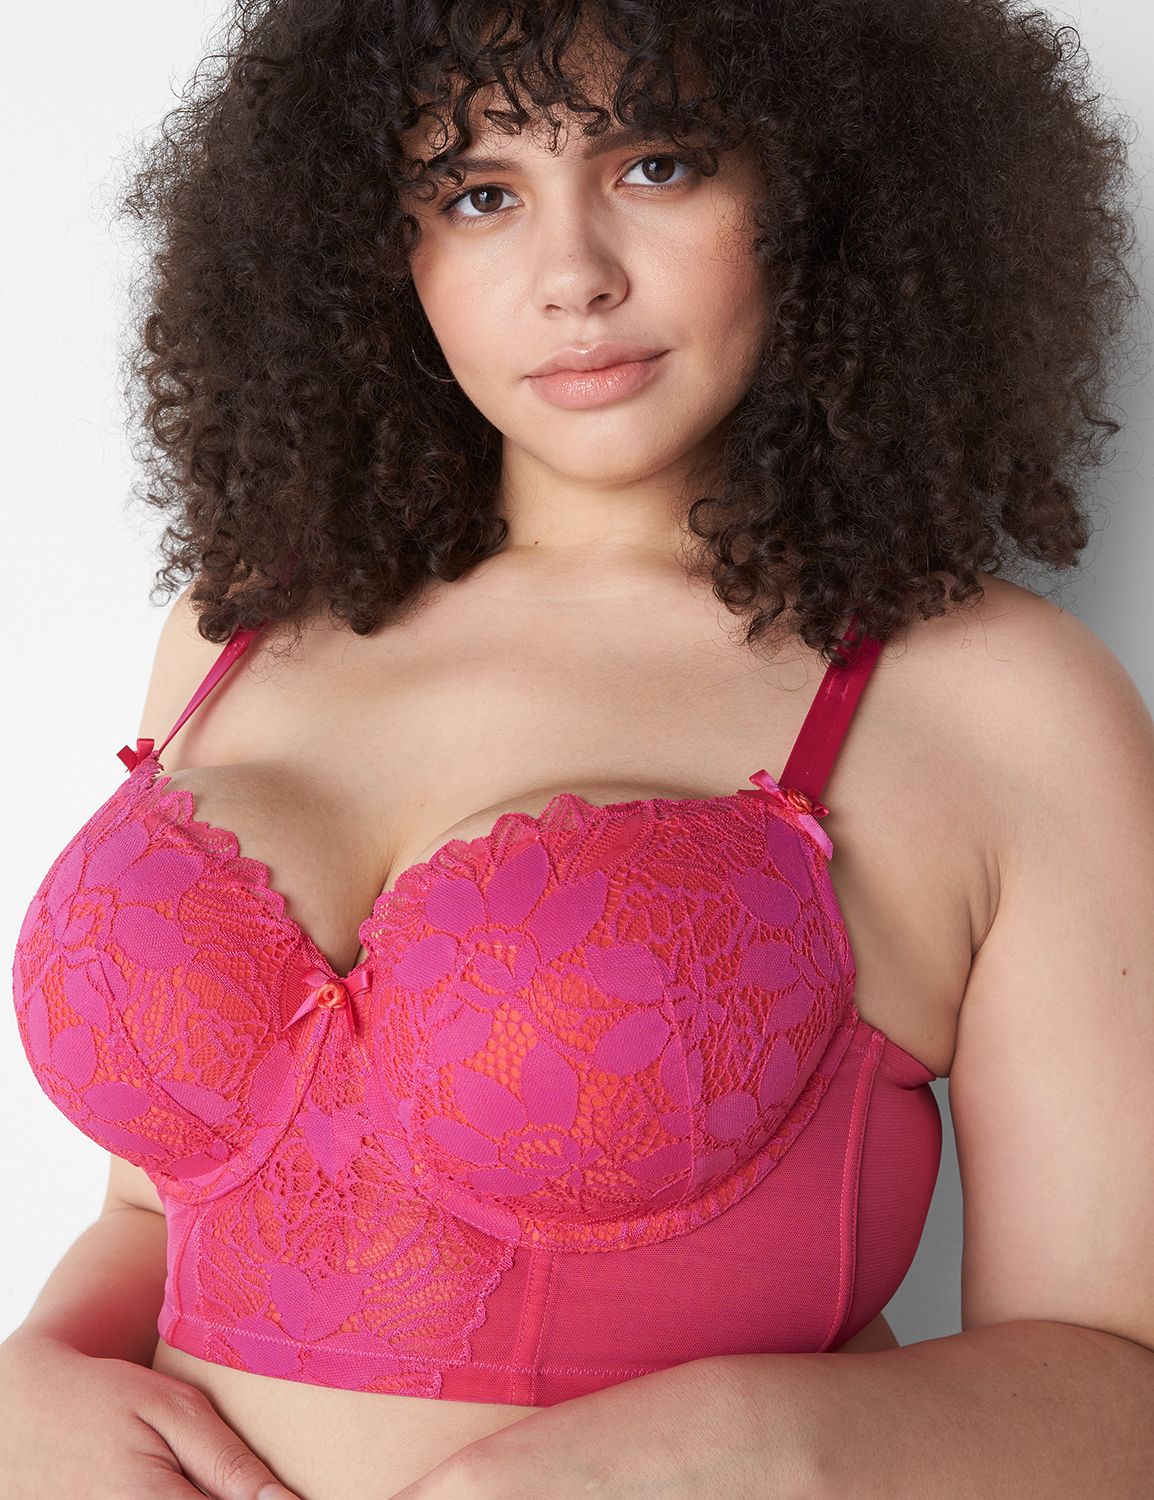 ▷ CACIQUE LANE BRYANT Women's Pink Lace Overlay Bralette